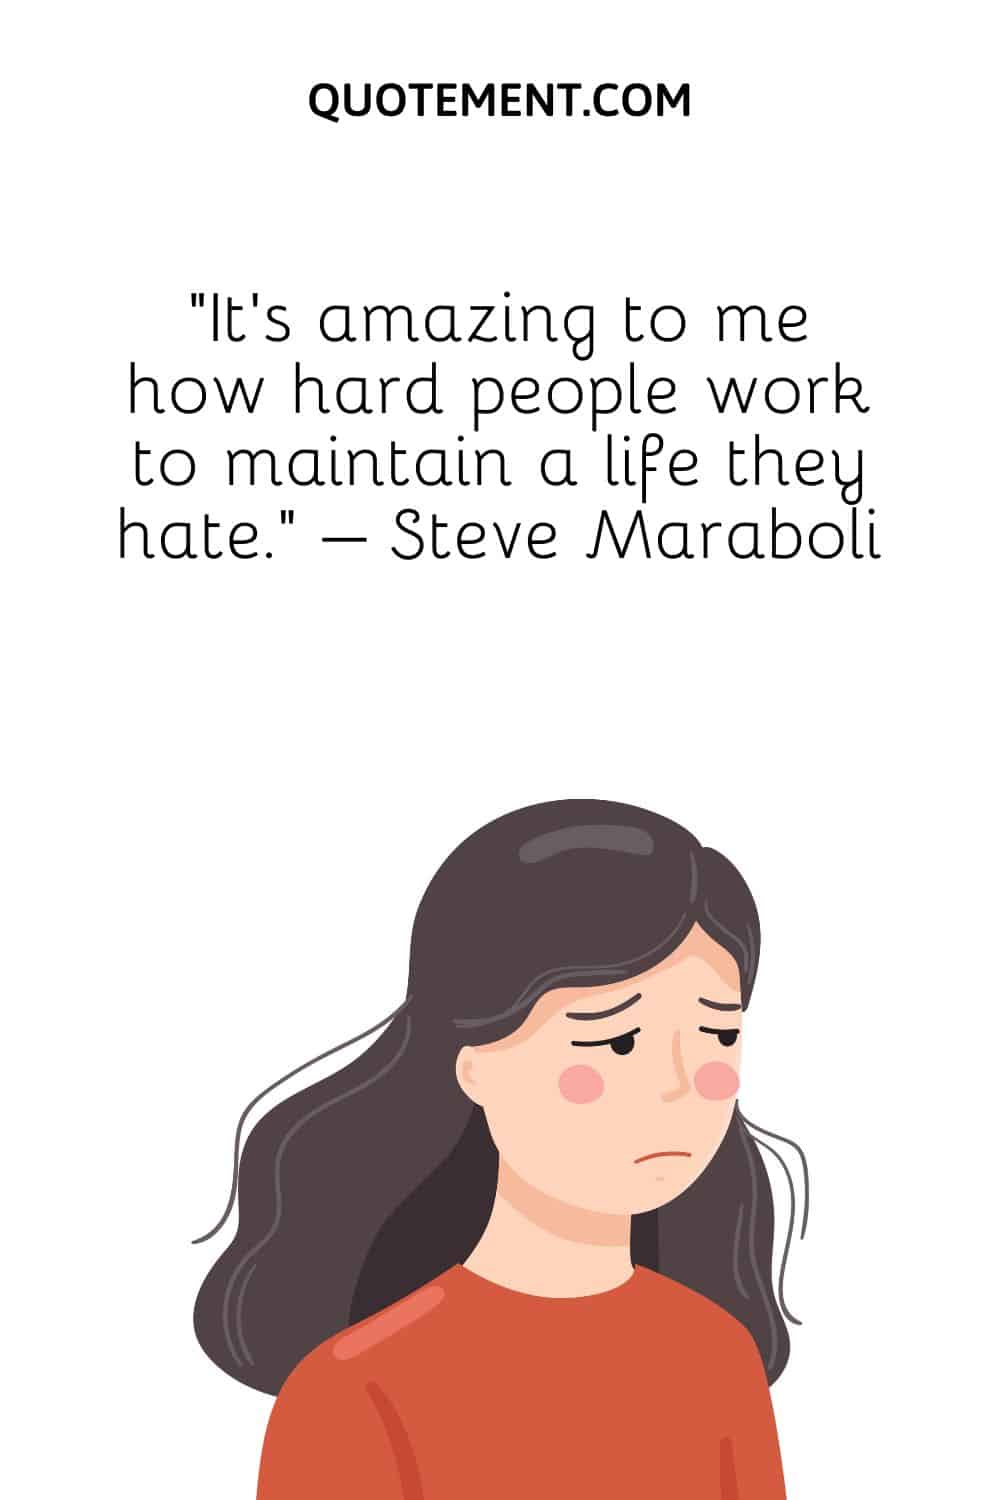 “It's amazing to me how hard people work to maintain a life they hate.” – Steve Maraboli